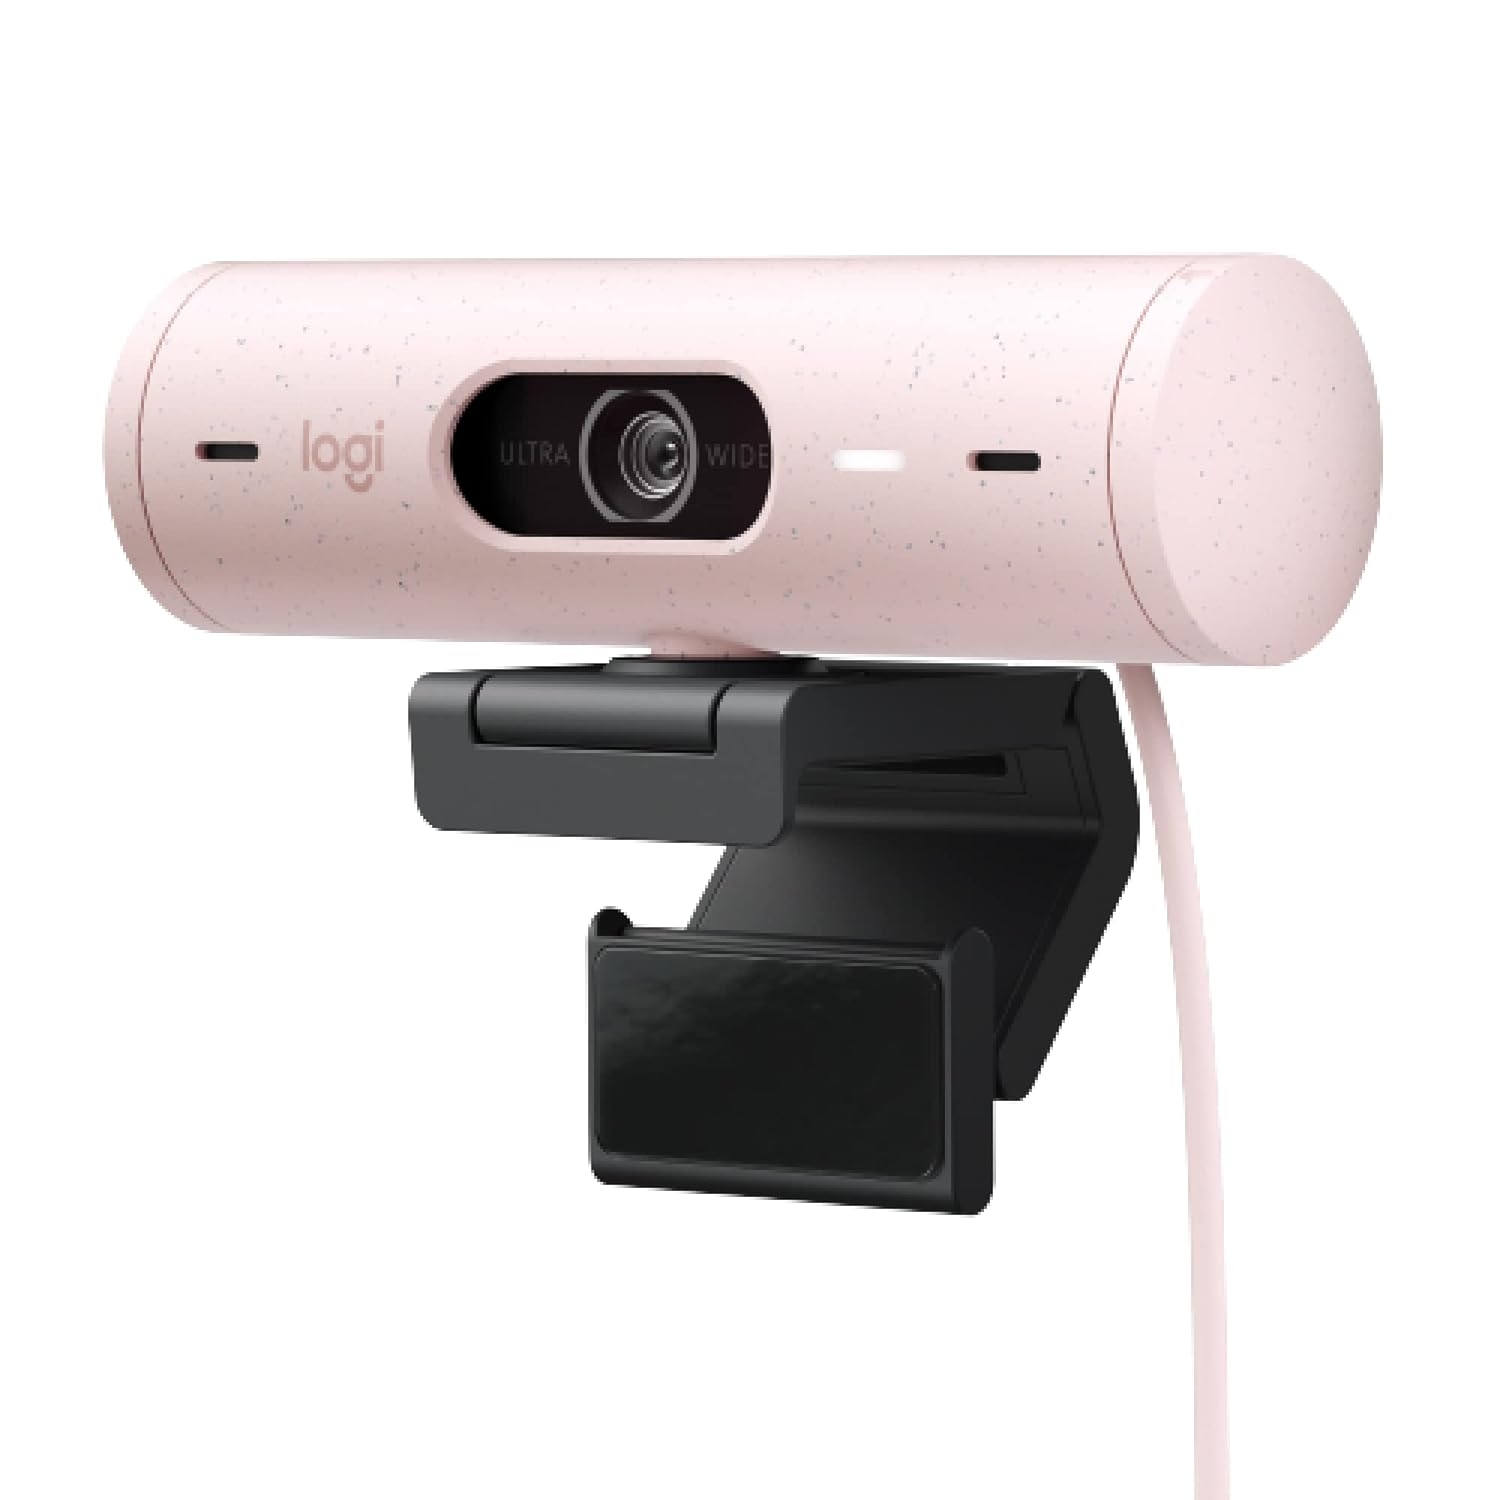 Logitech Brio 500 Full Hd Webcam with Auto Light Correction, Show Mode, Dual Noise Reduction Mics, Webcam Privacy Cover, Works with Microsoft Teams, Google Meet, Zoom, USB-C Cable - Rose - Digital Webcams